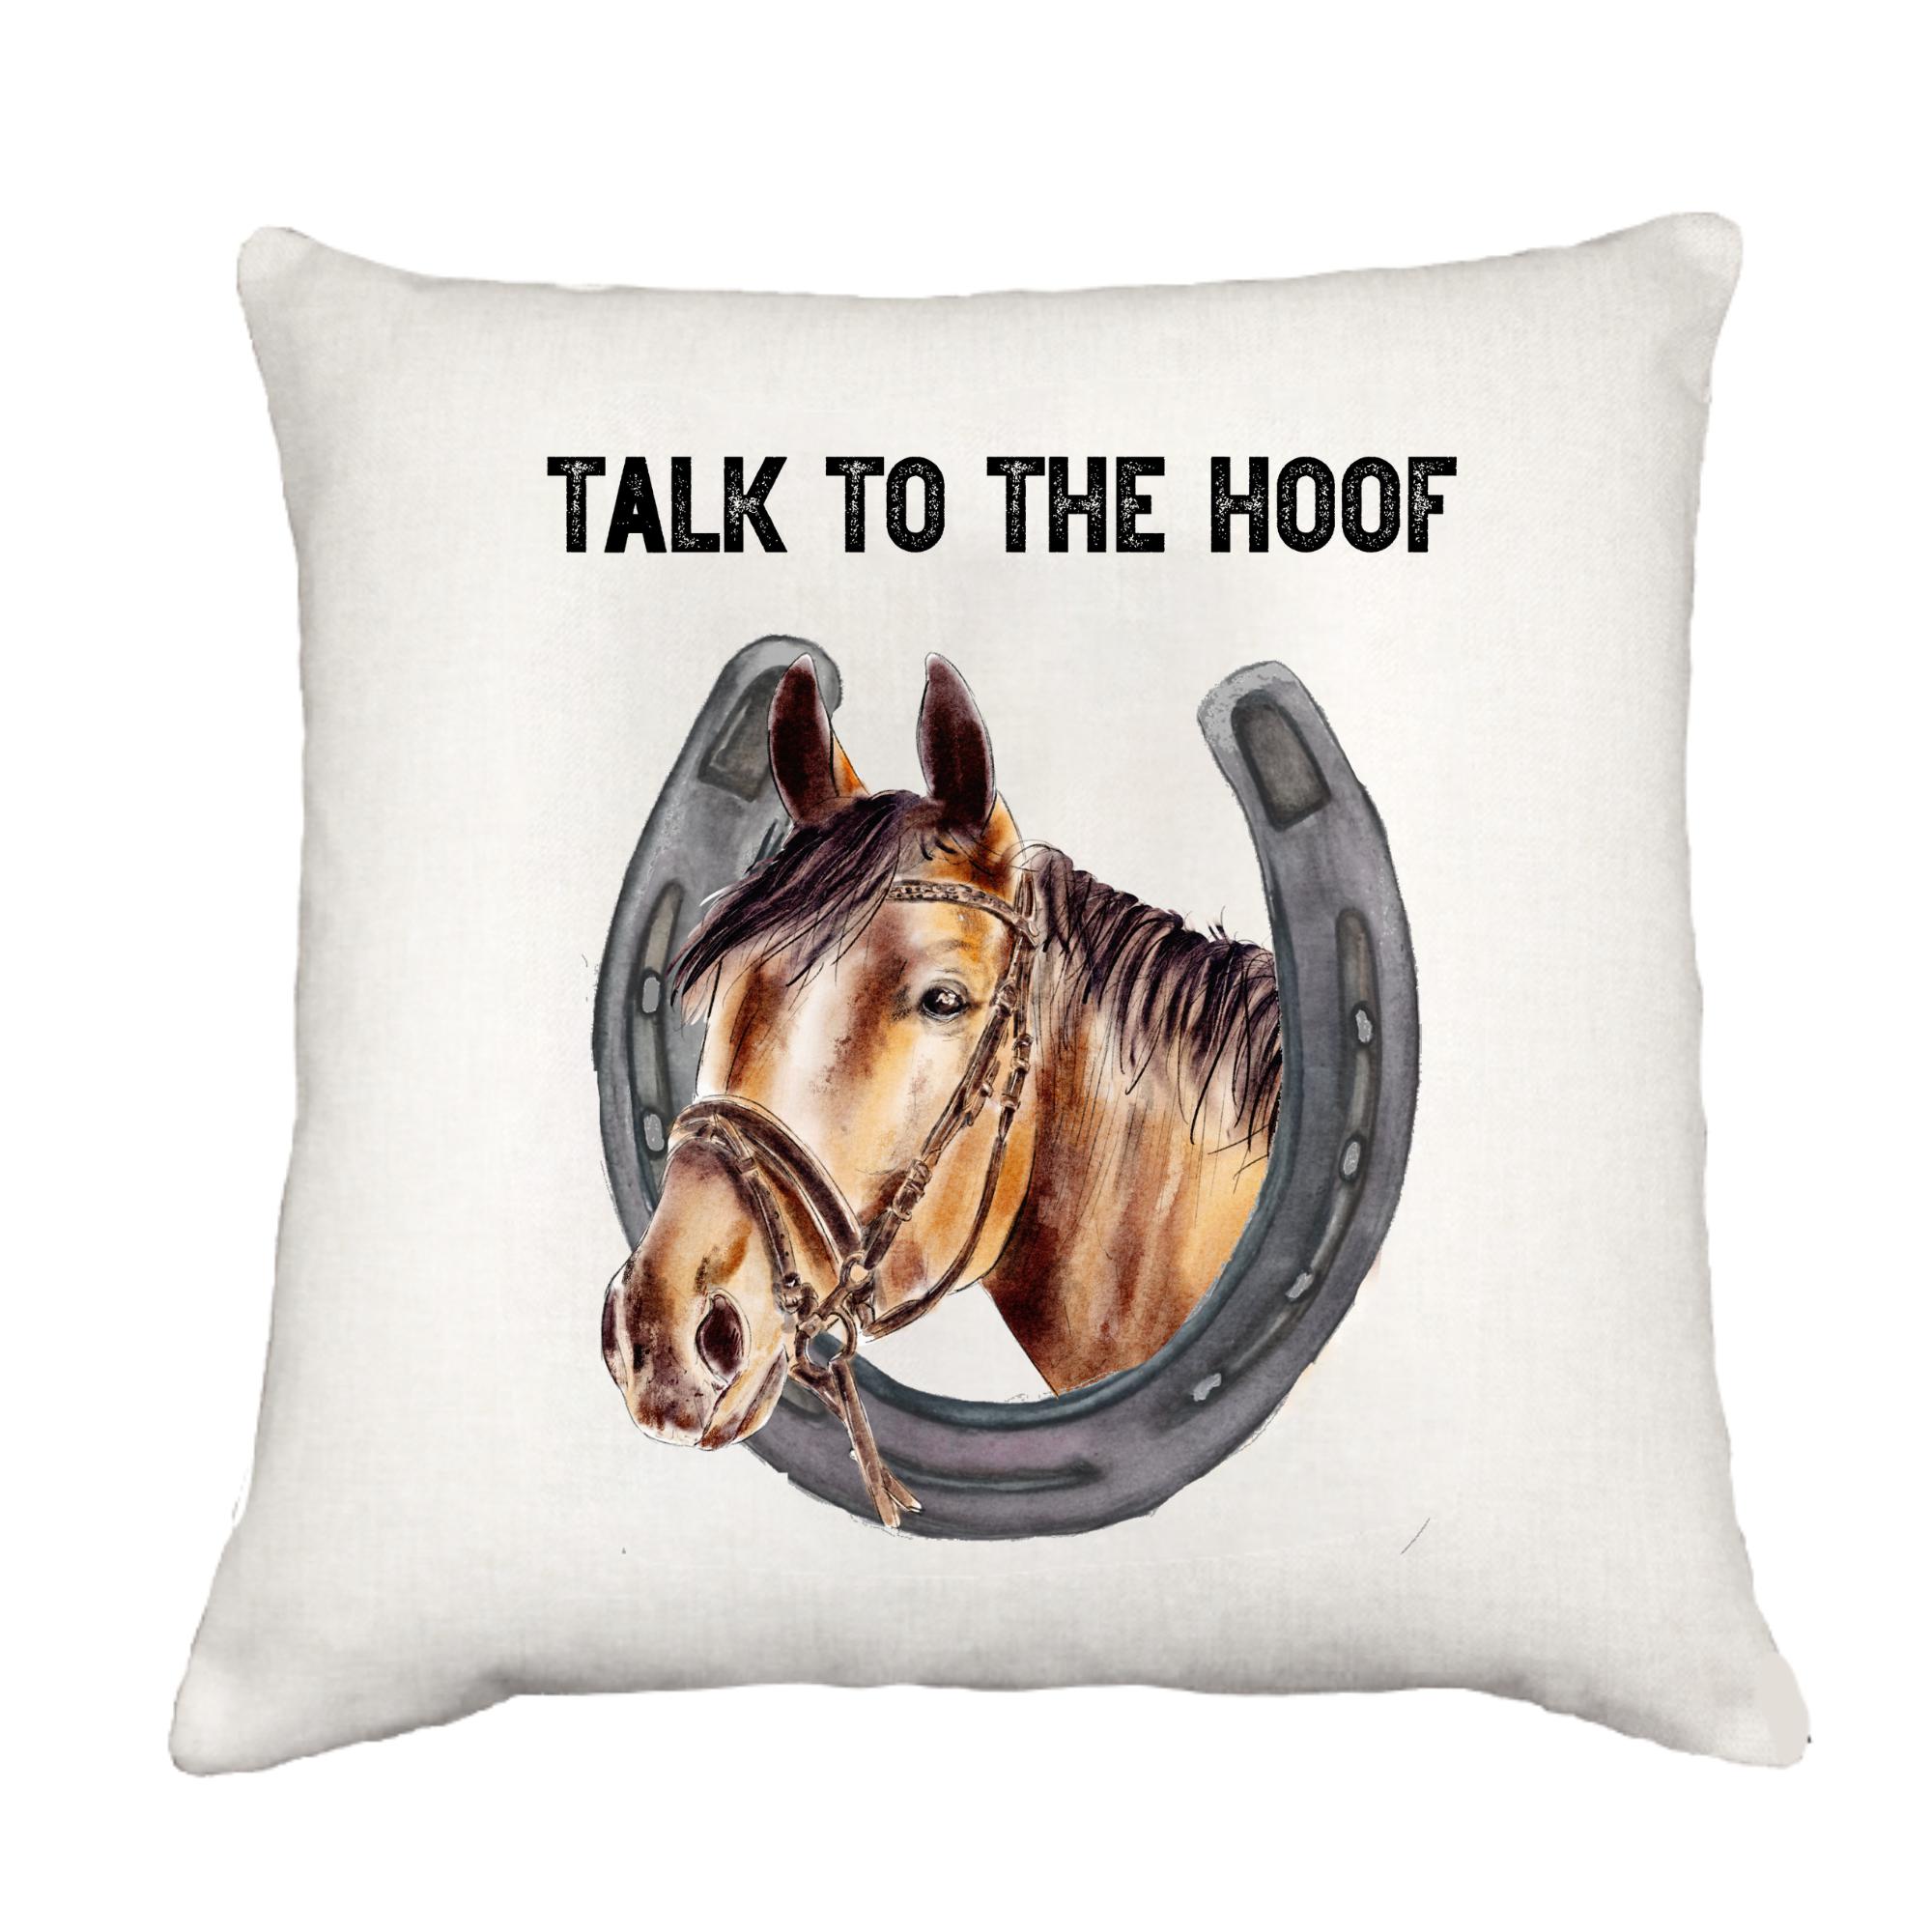 Talk To The Hoof Down Pillow